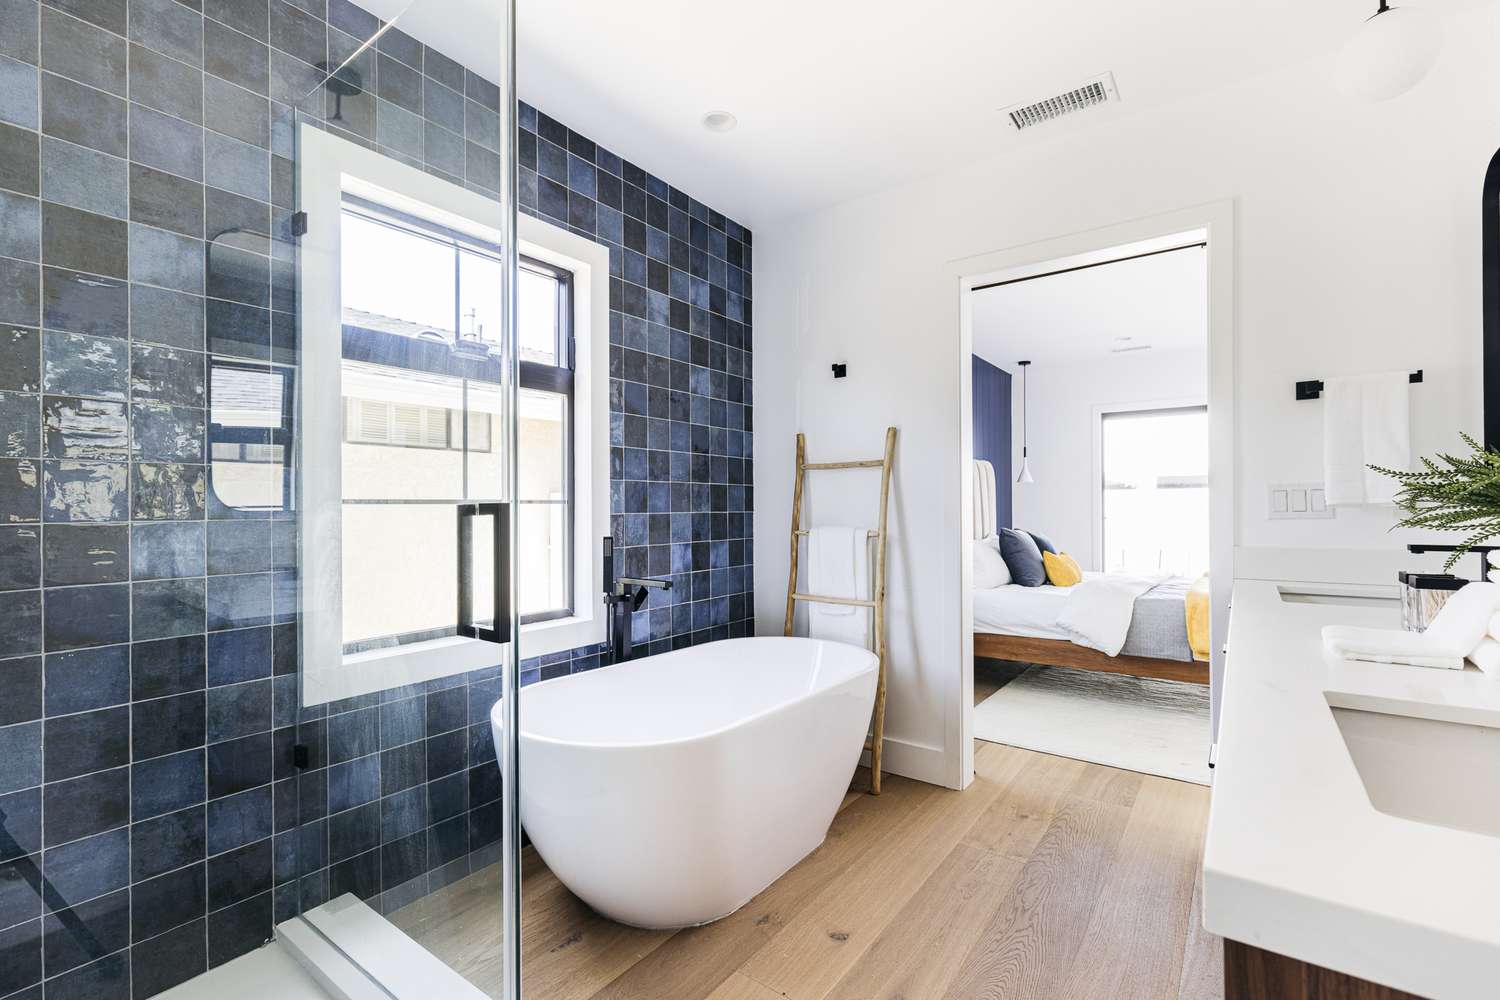 Freestanding tub next to blue-tiled wall in spa-like bathroom